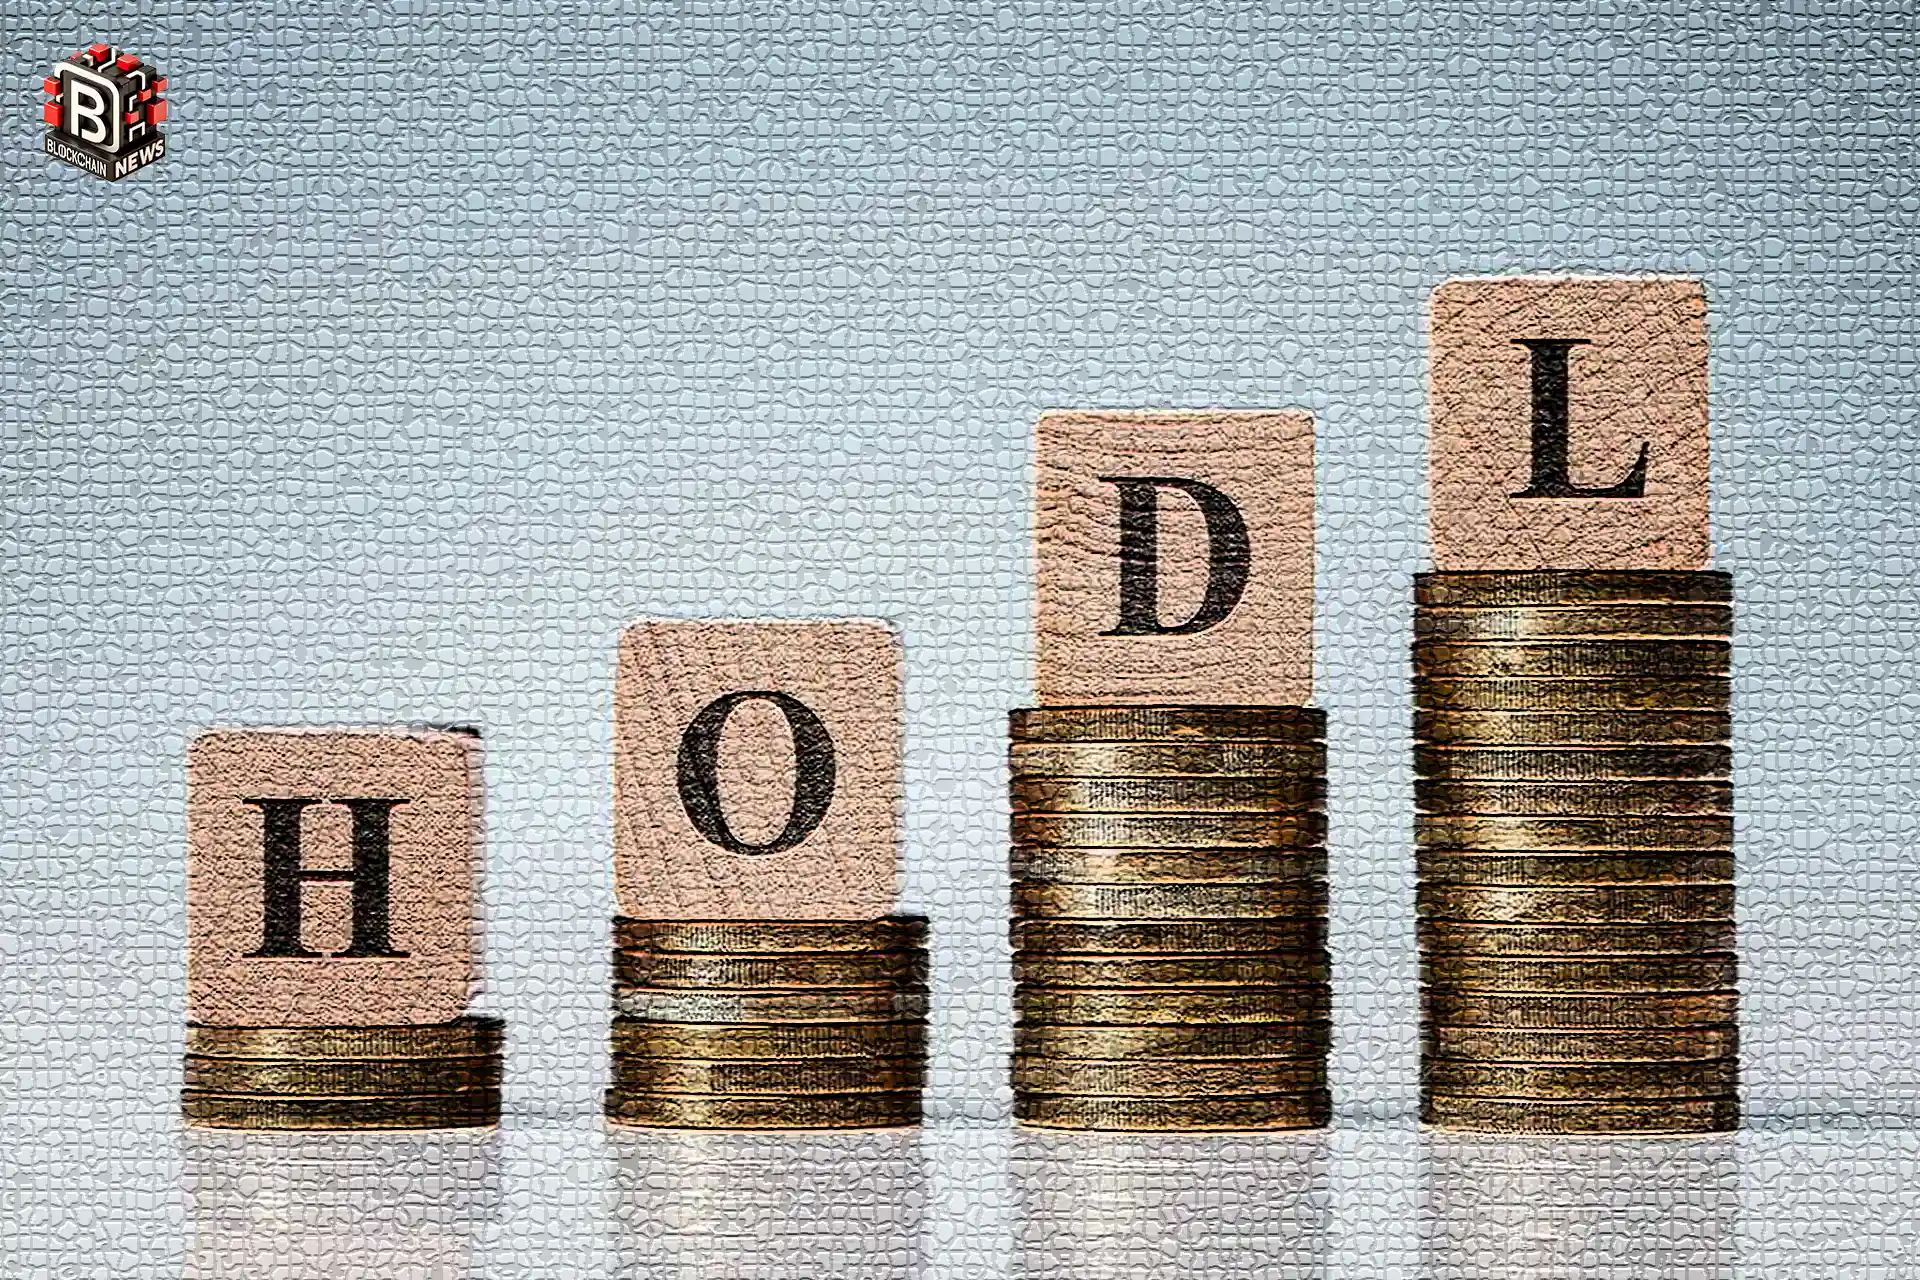 What-is-digital-currency-holding-or-HODL